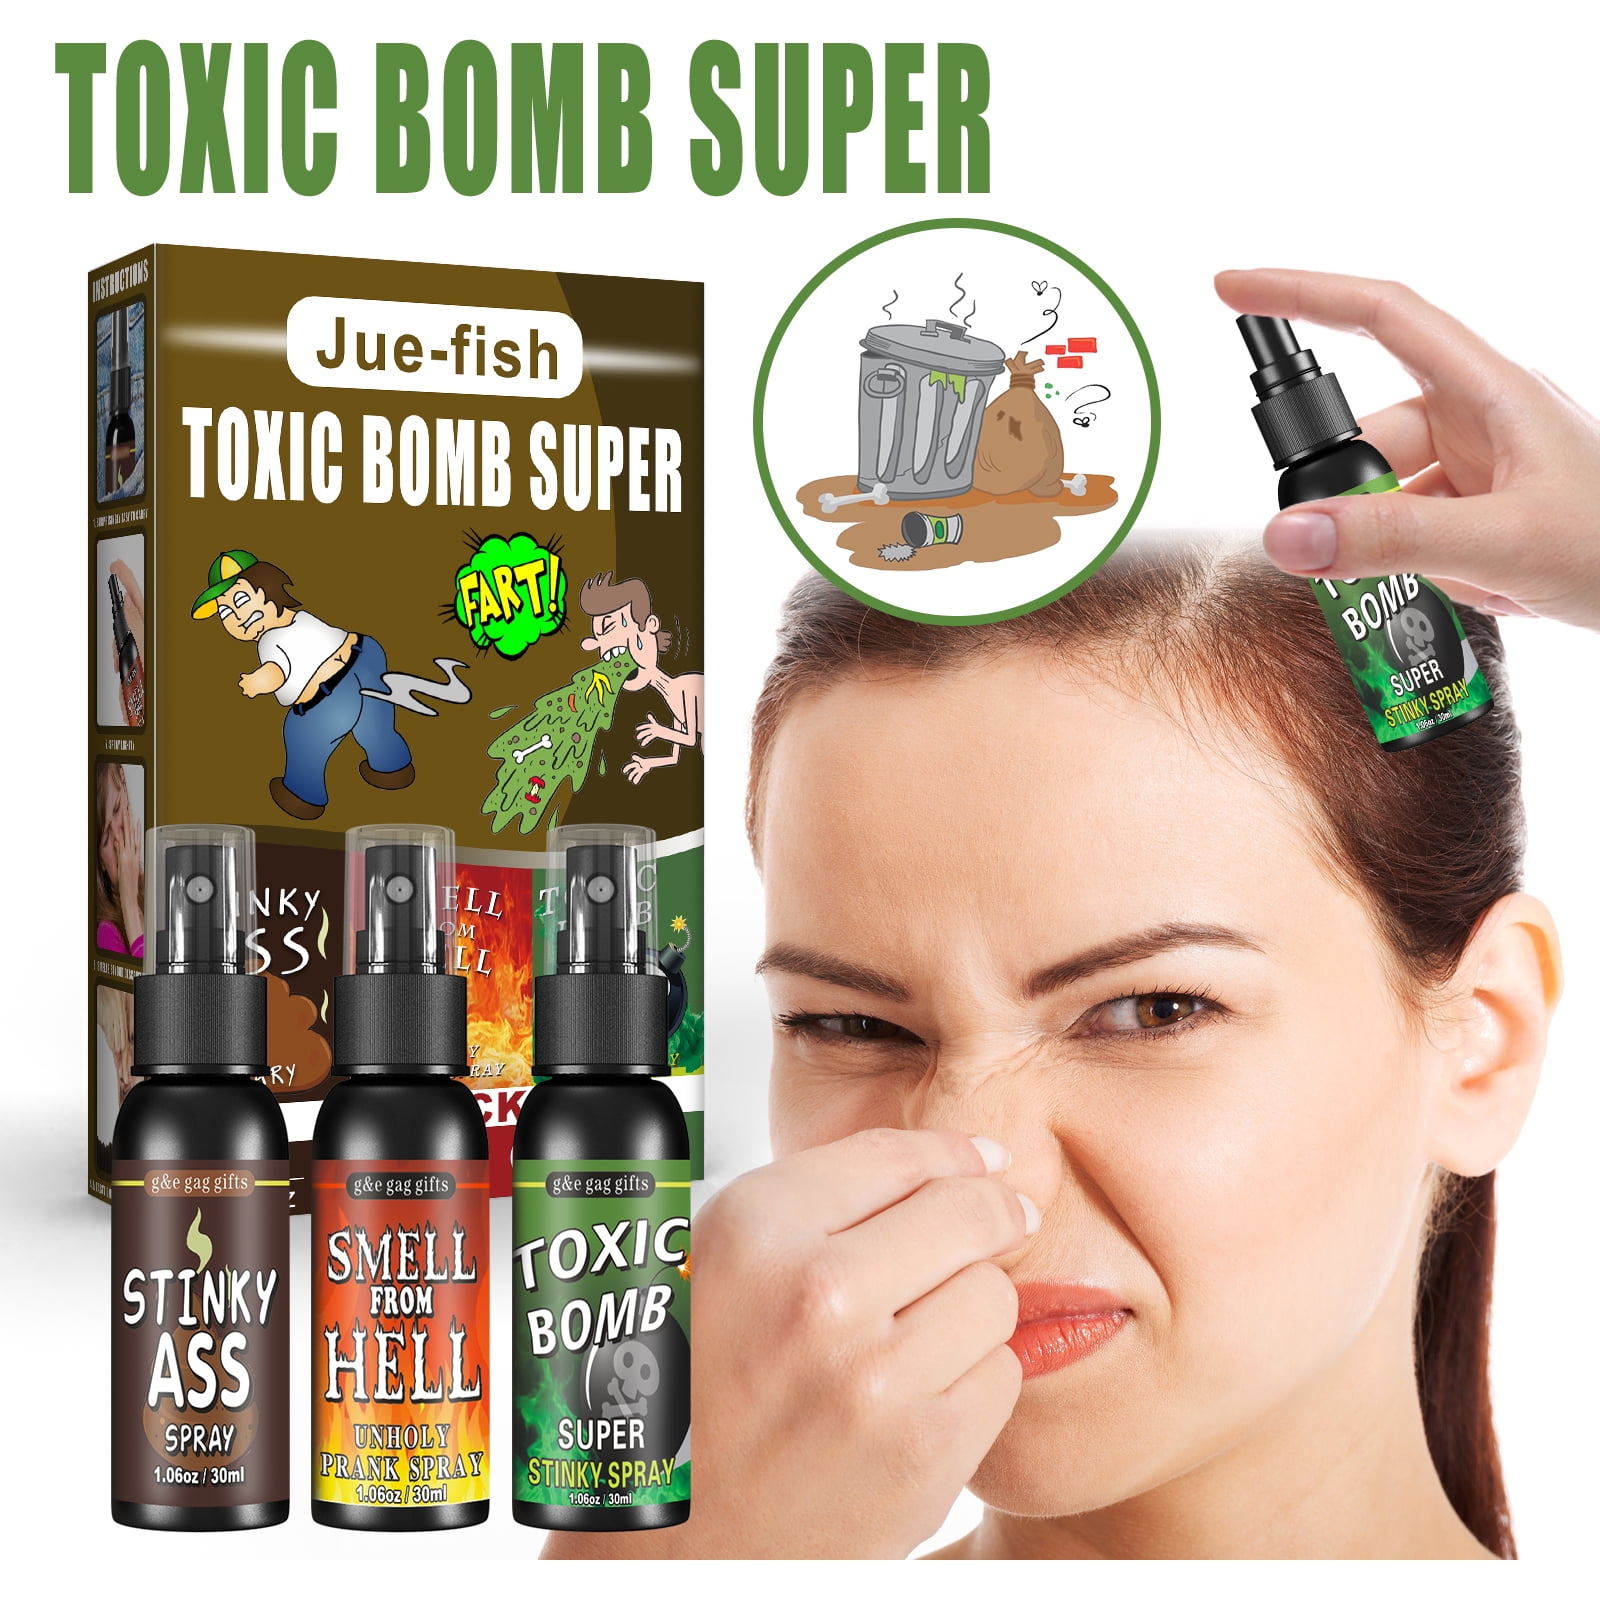 Nasty Smelling 3 Pack - Stinky Ass Fart Spray - Toxic Bomb - Smell from  Hell Funny Prank Toys 